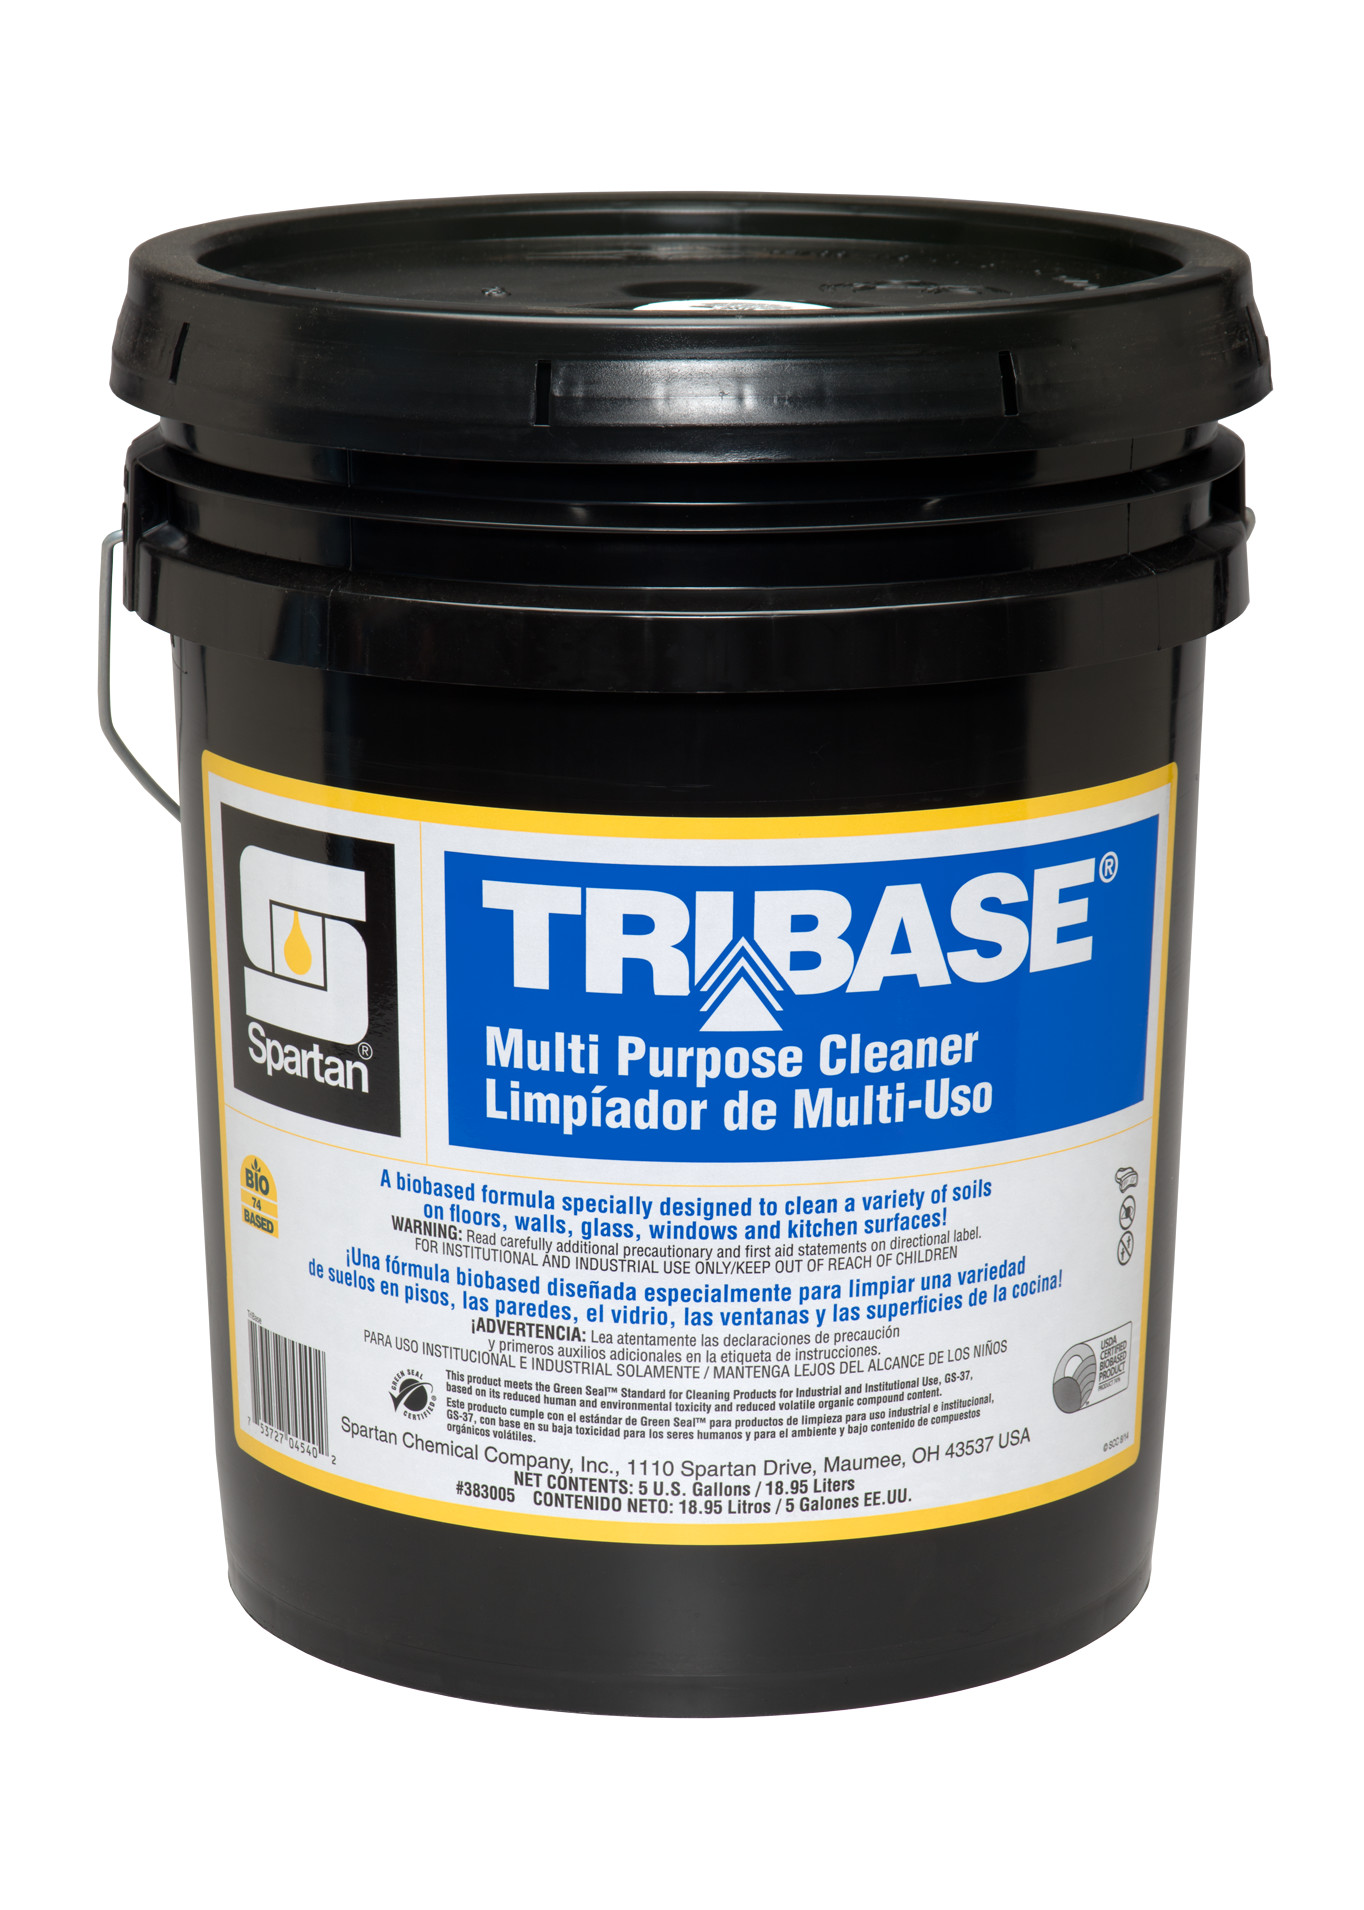 Spartan Chemical Company TriBase Multi Purpose Cleaner, 5 GAL PAIL